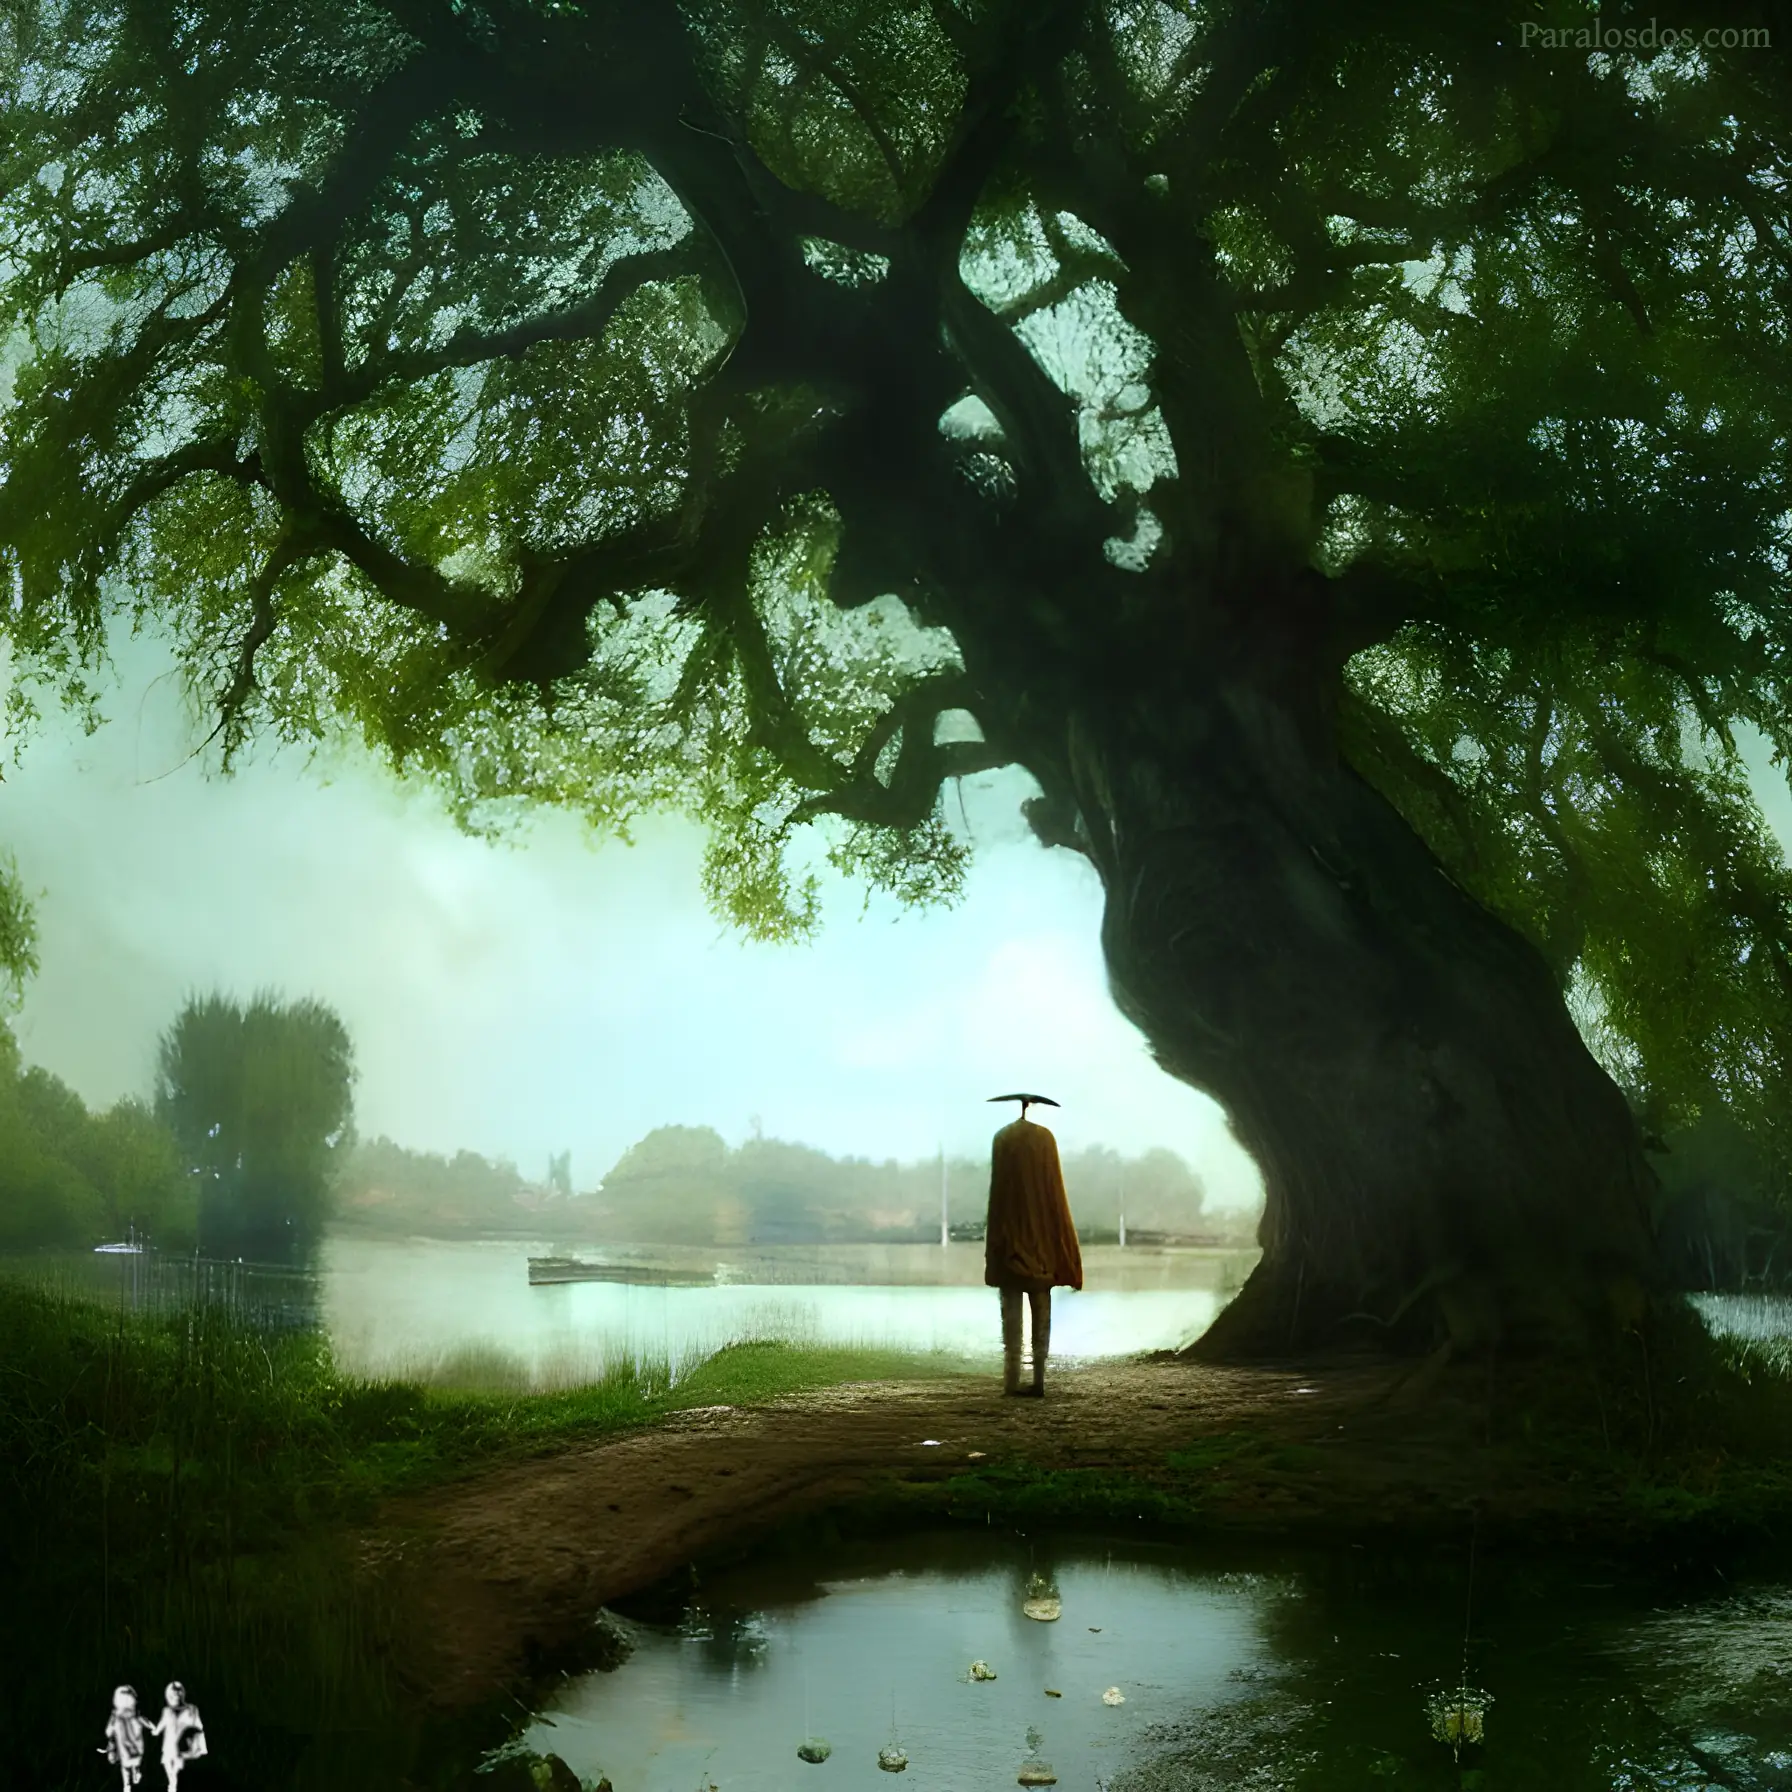 An artistic rendering of a figure standing in contemplation under a large tree by water.